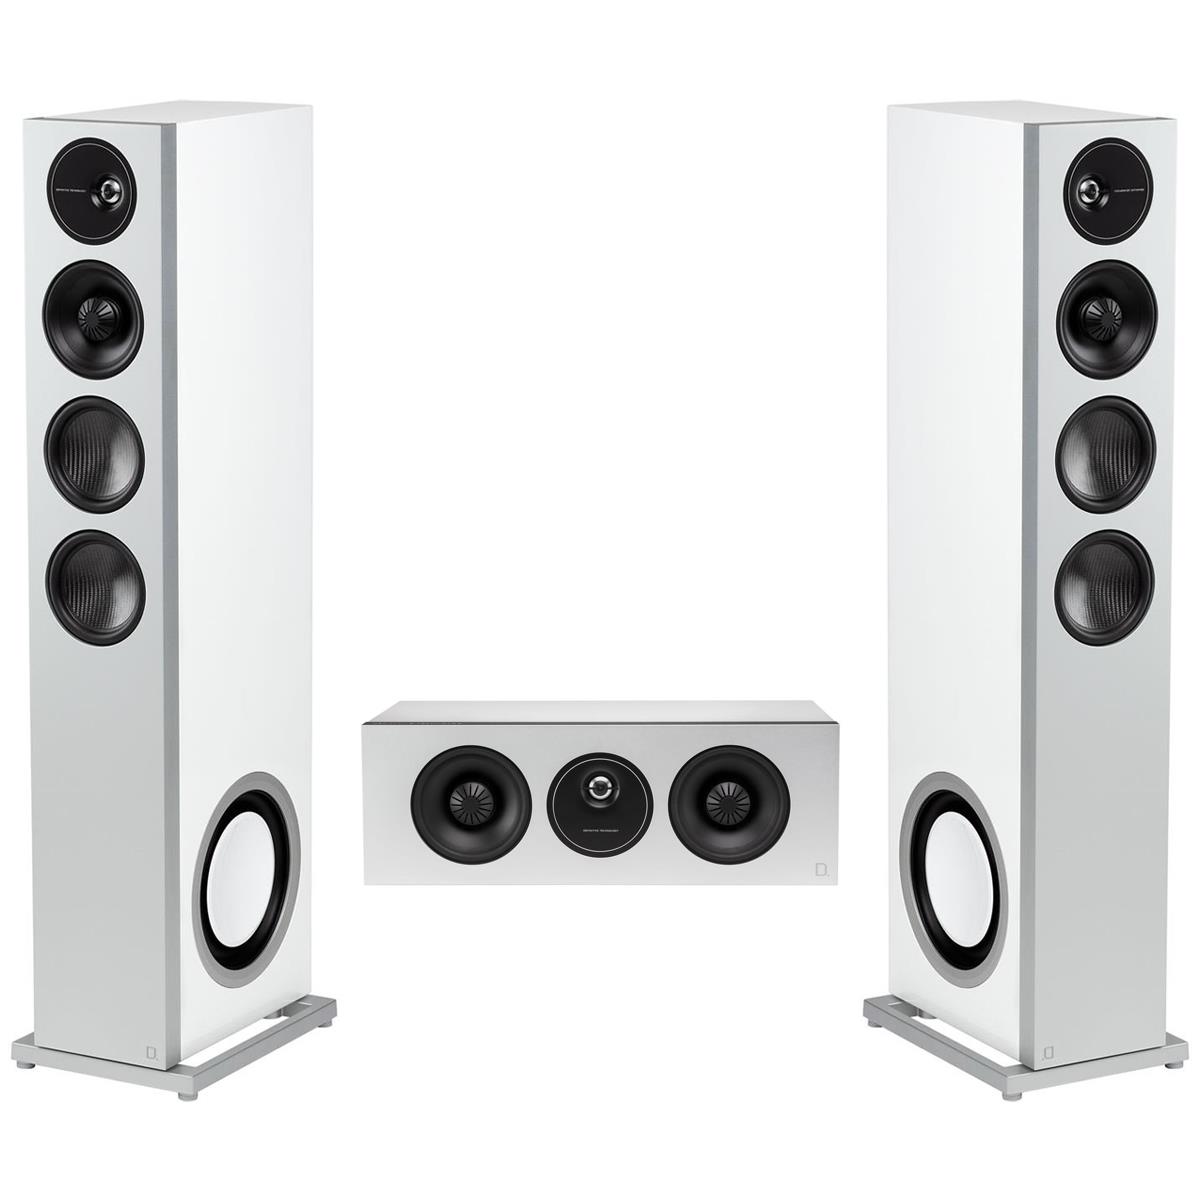 Image of Definitive Technology Demand 3.0 Home Theater System